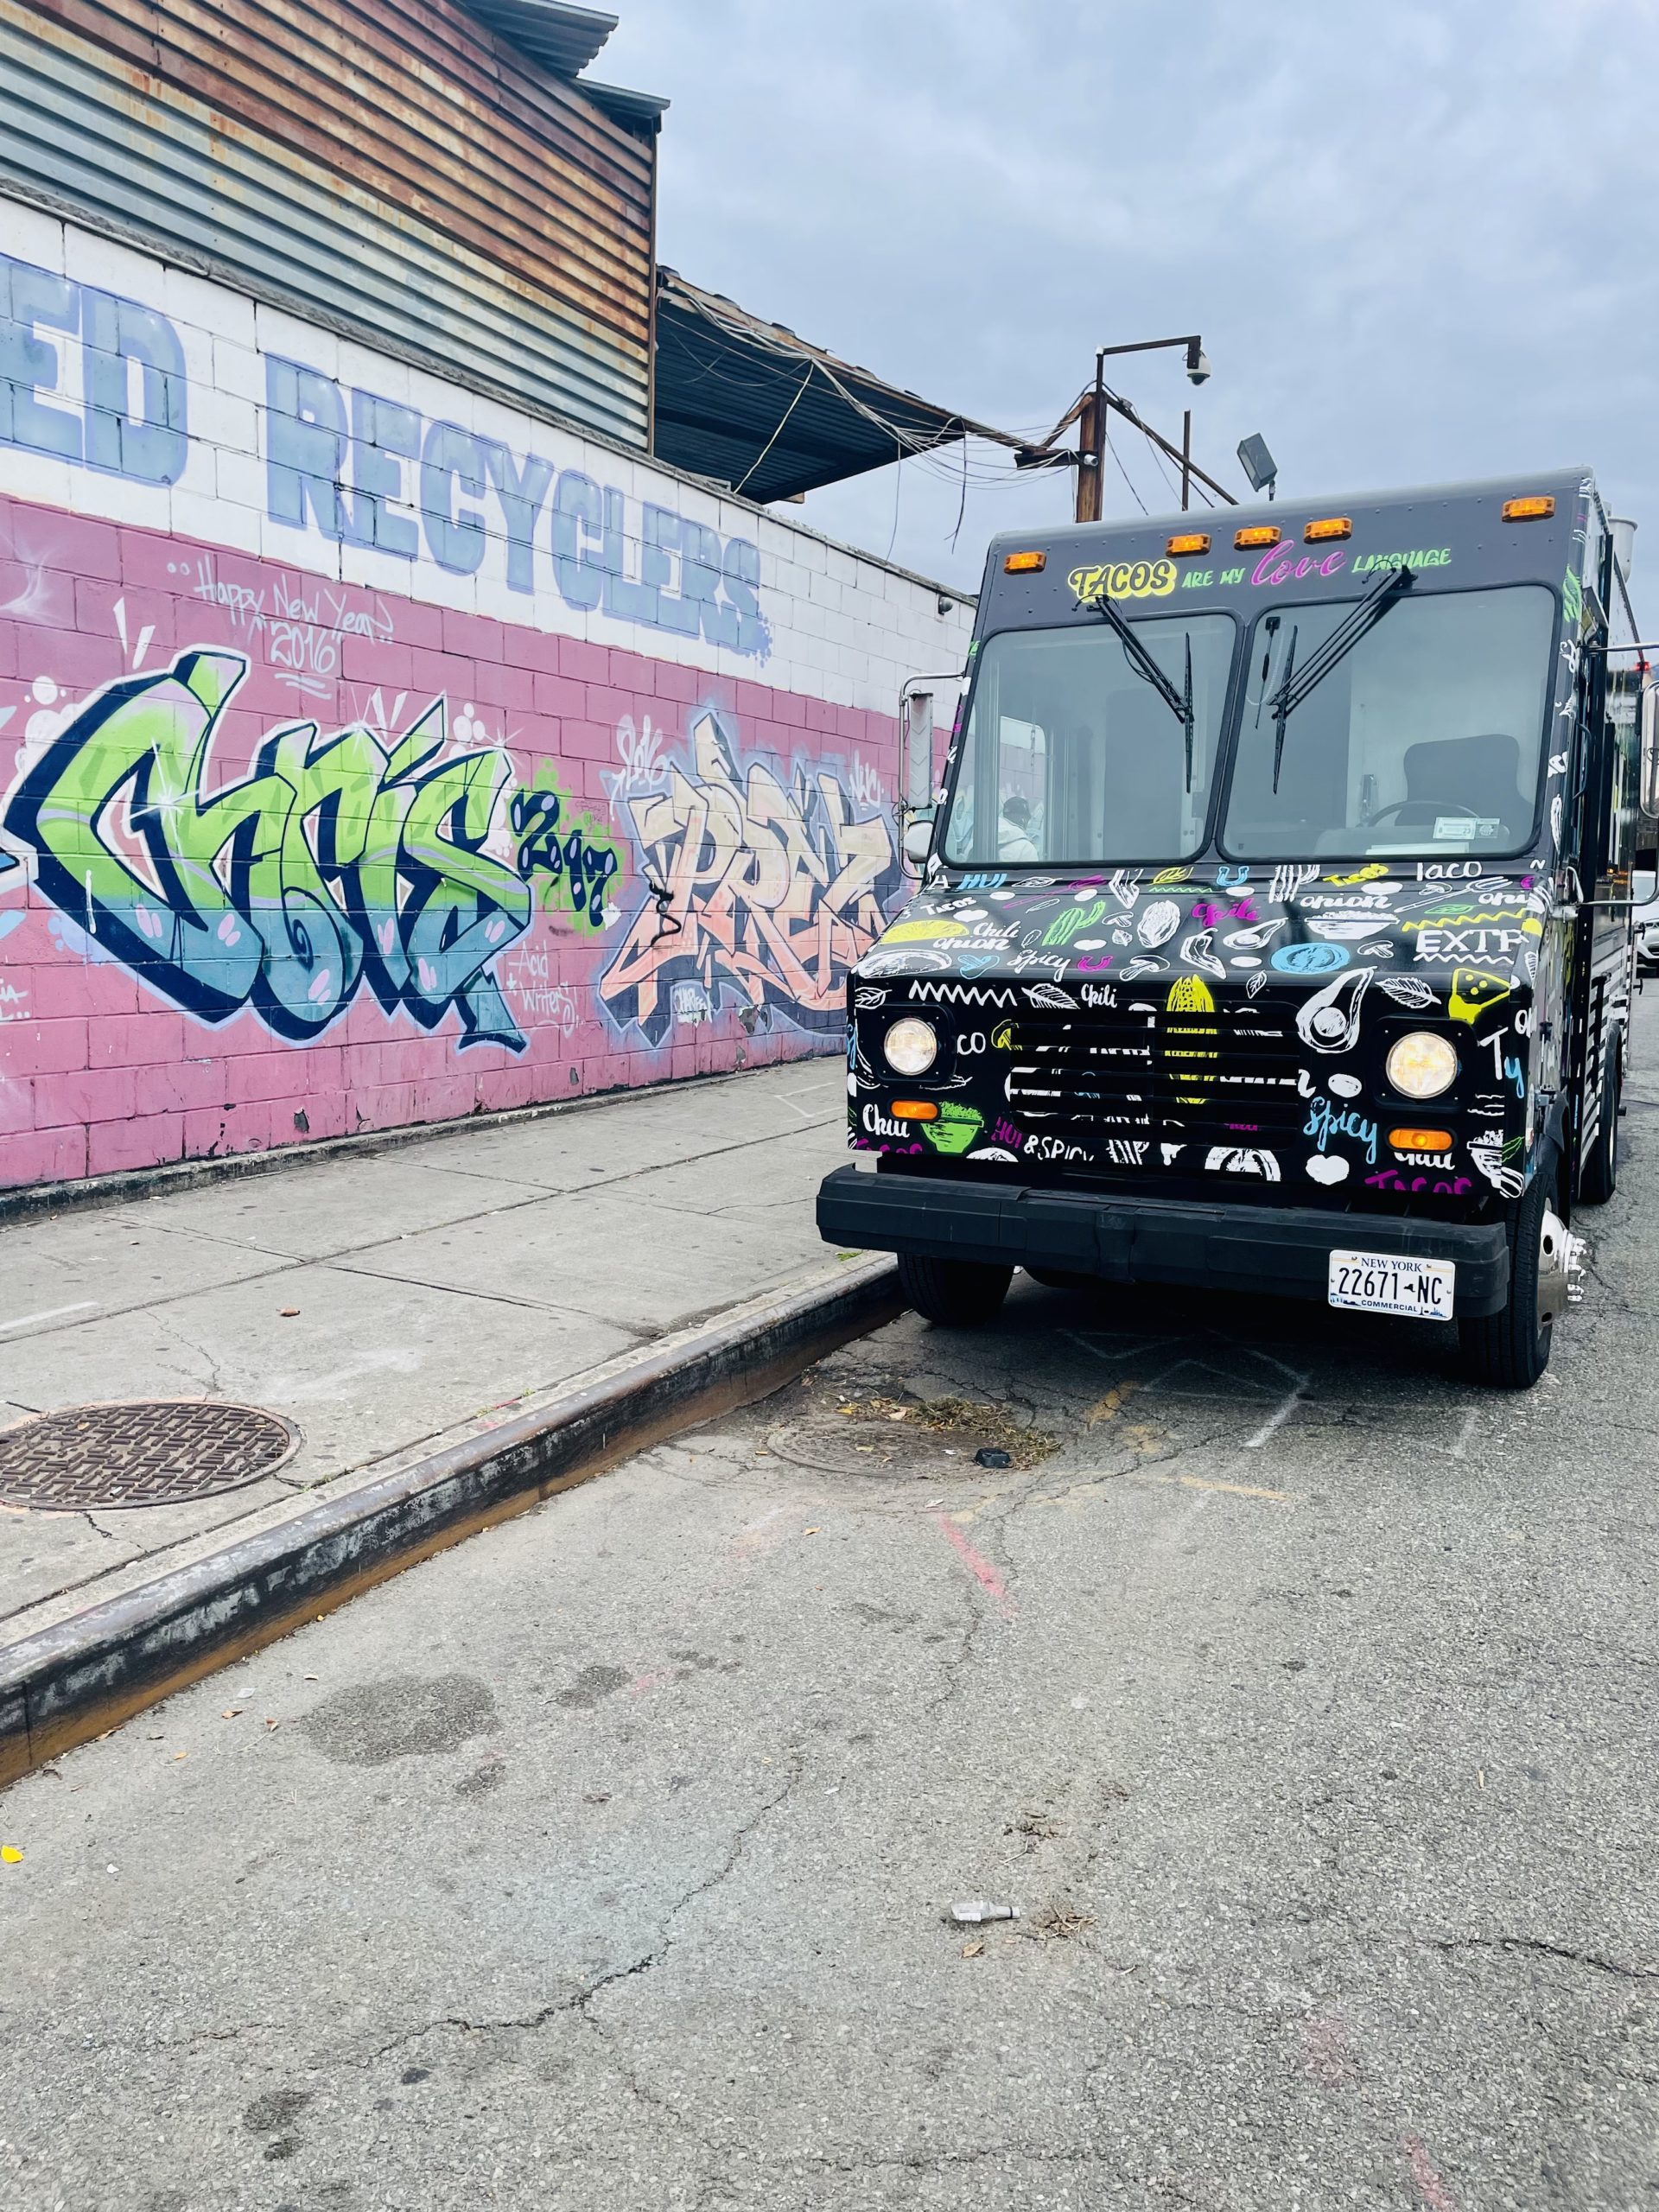 Kinky Taco Truck parked by some wall graffiti on the street of New York City